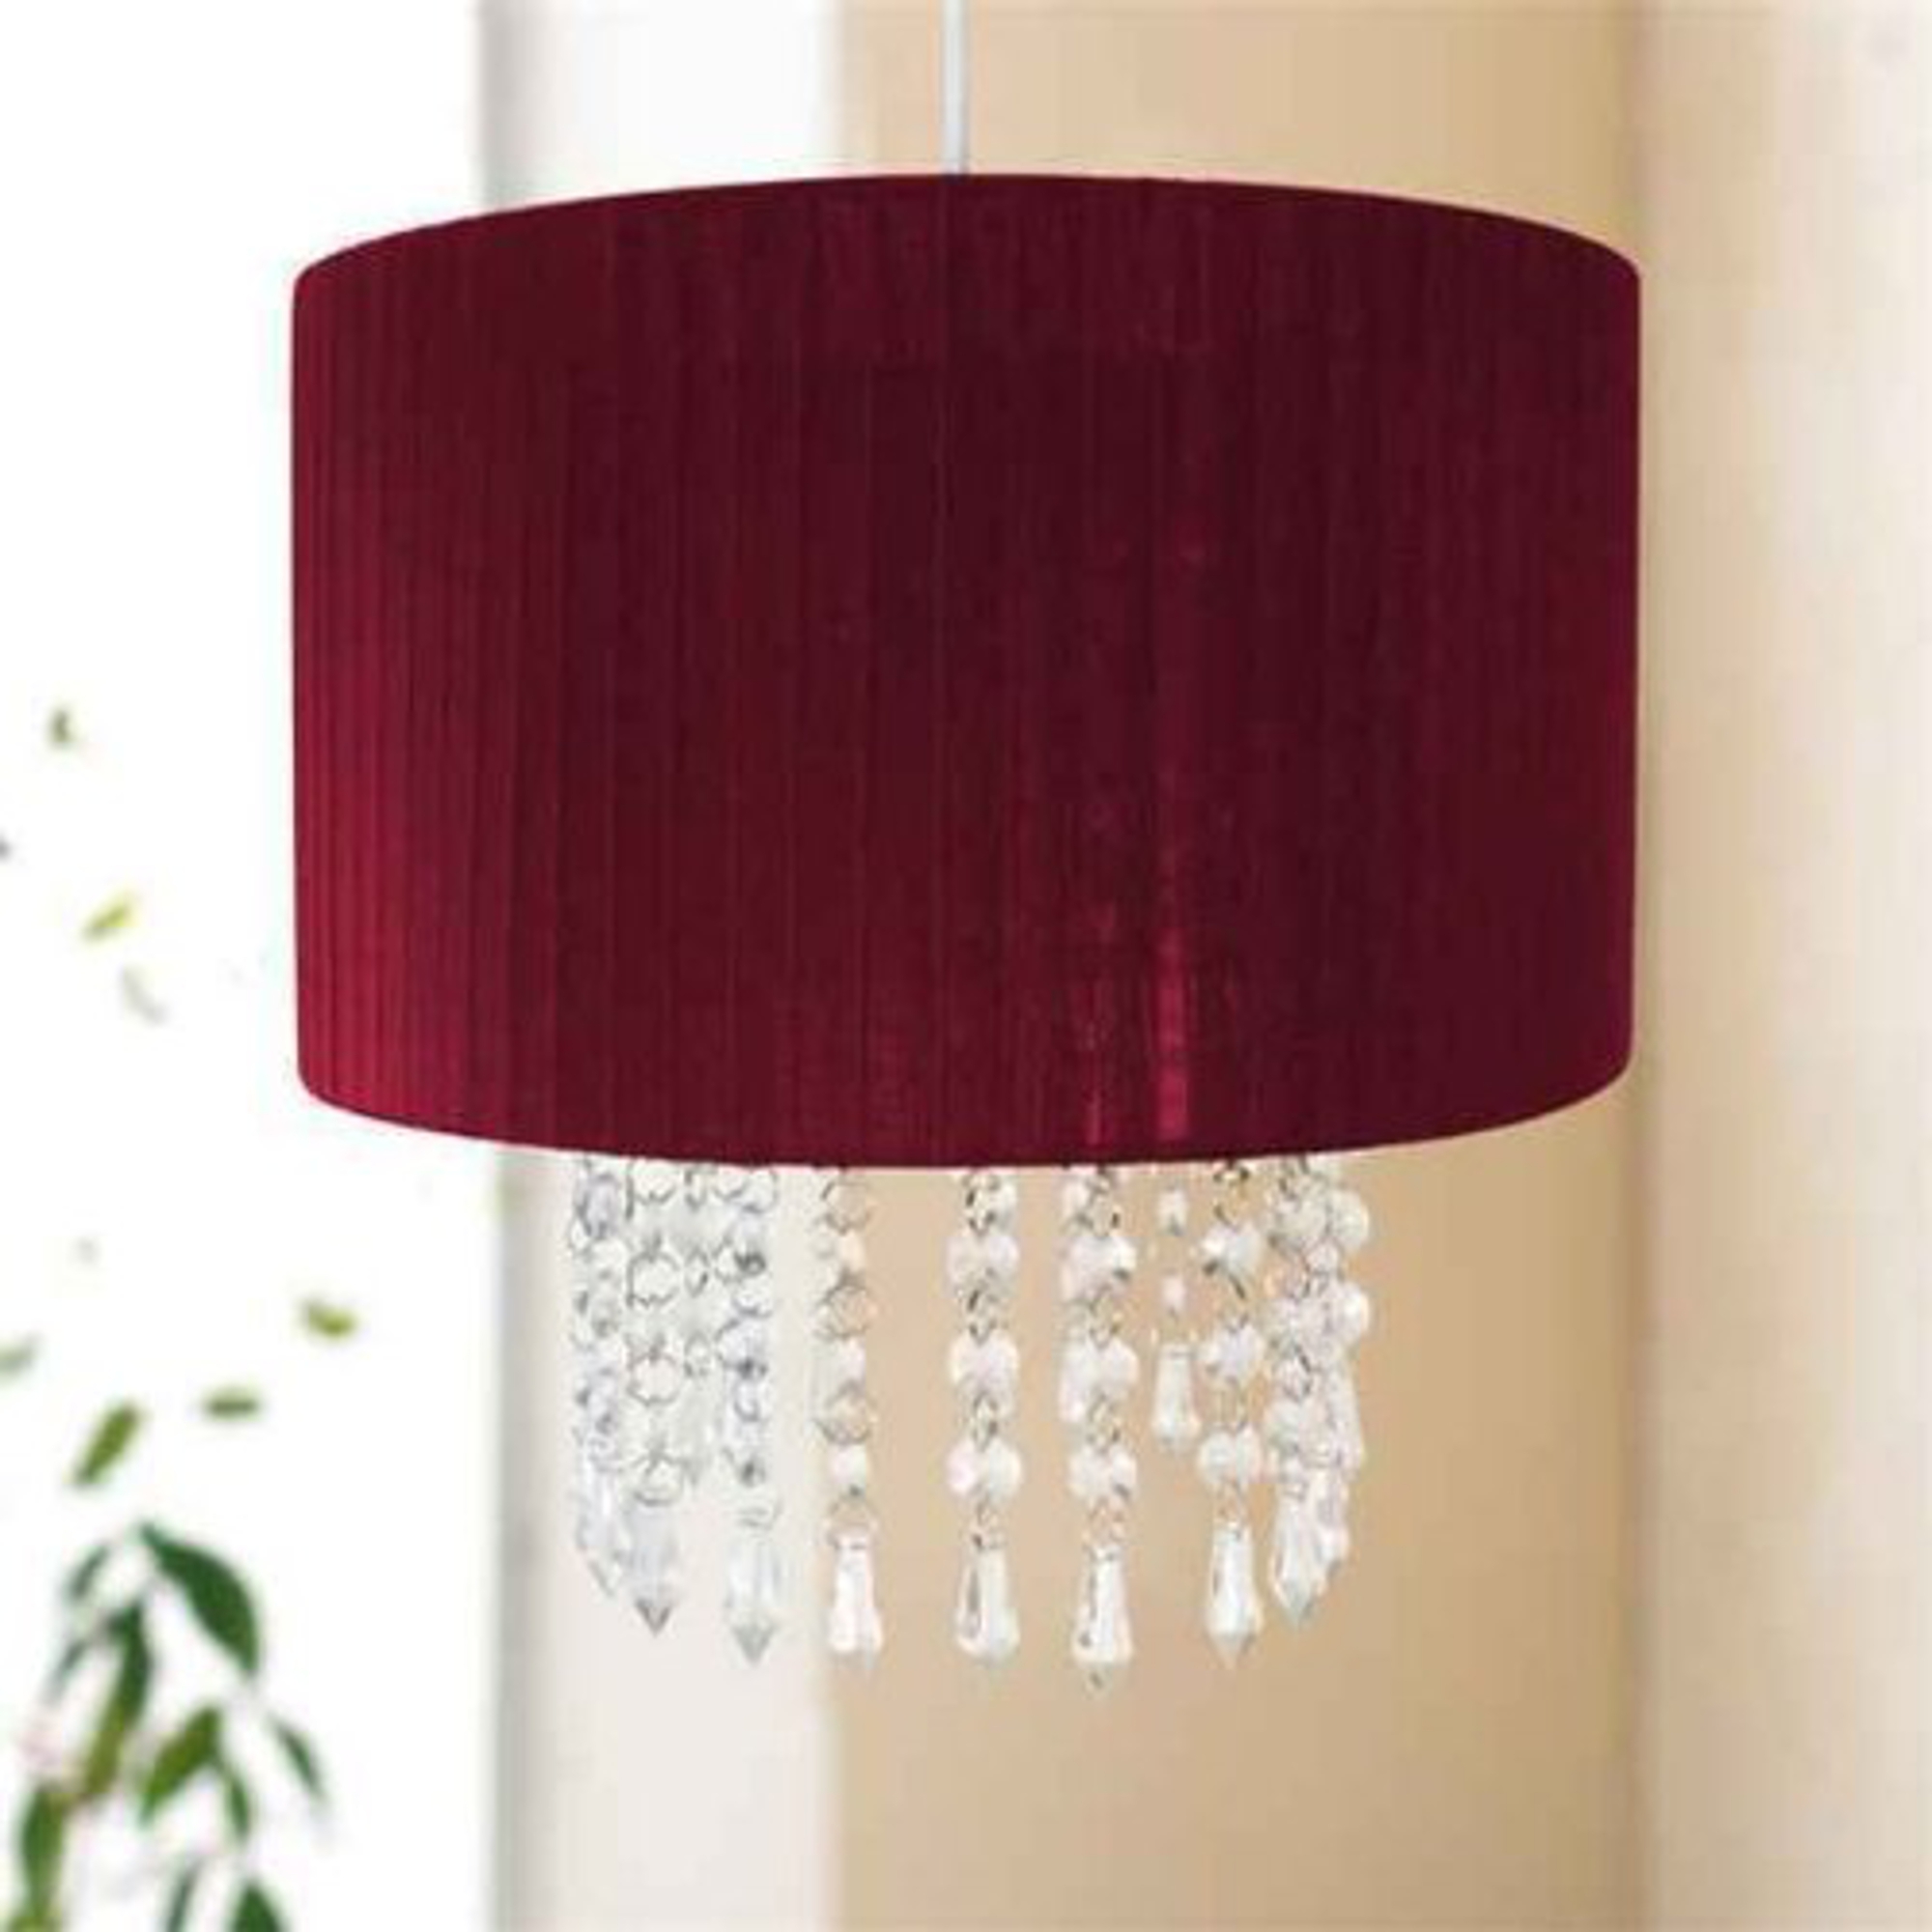 Easy Fit Chandelier 'Red' Hanging Crystals 30cm Pendant Shade Lighting